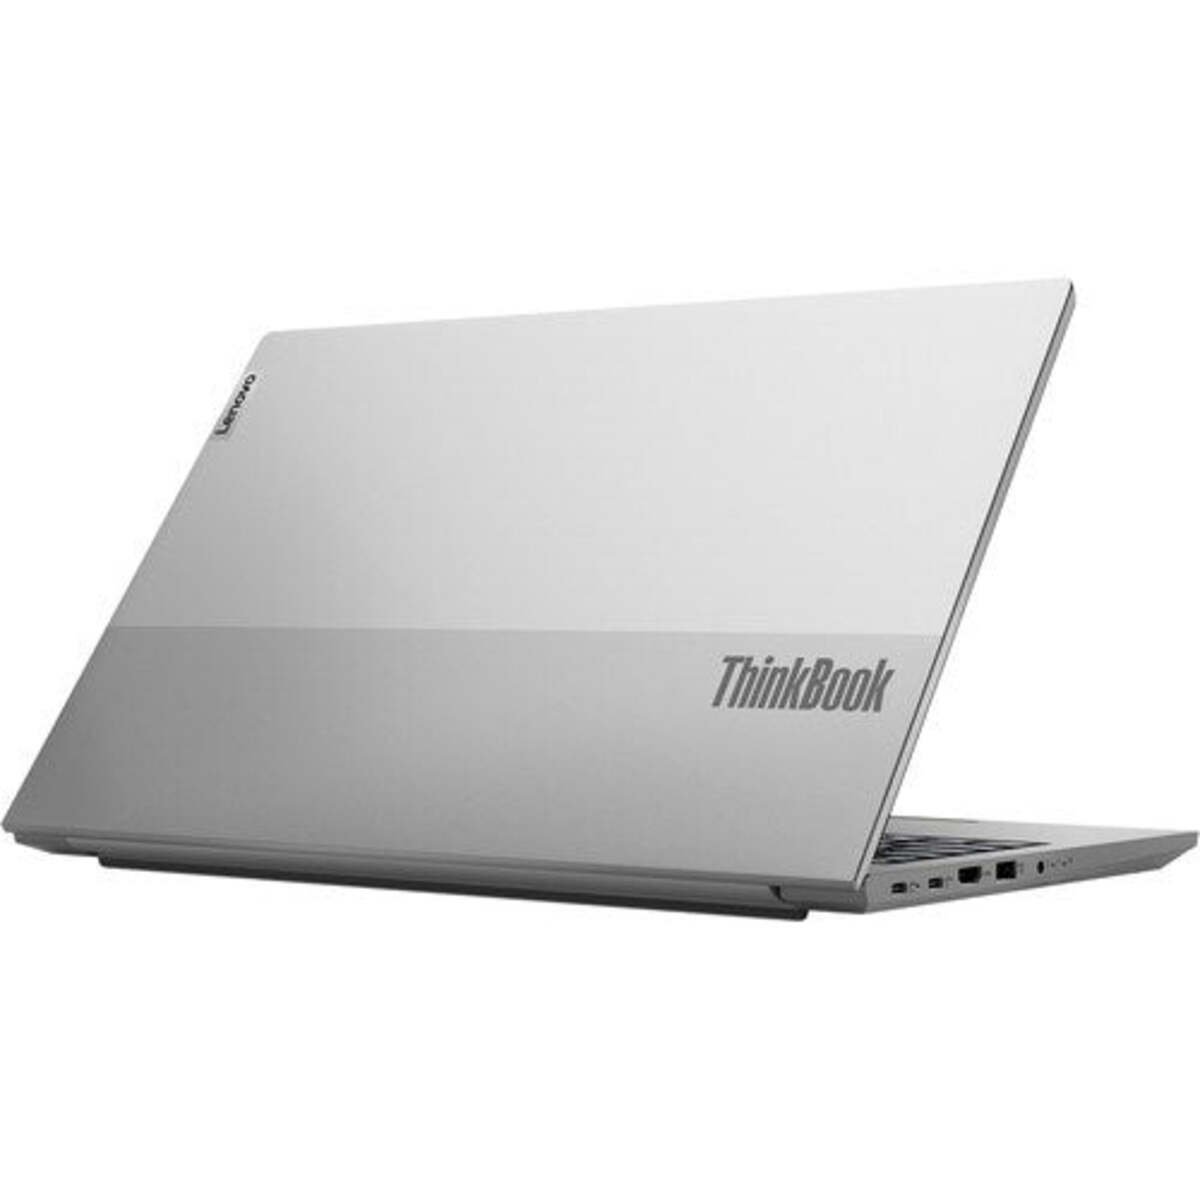 Lenovo ThinkBook 15 G2 ITL, Core i5-1135G7, 8GB RAM 1TB HDD, 15.6 Inches FHD, DOS. Mineral Grey